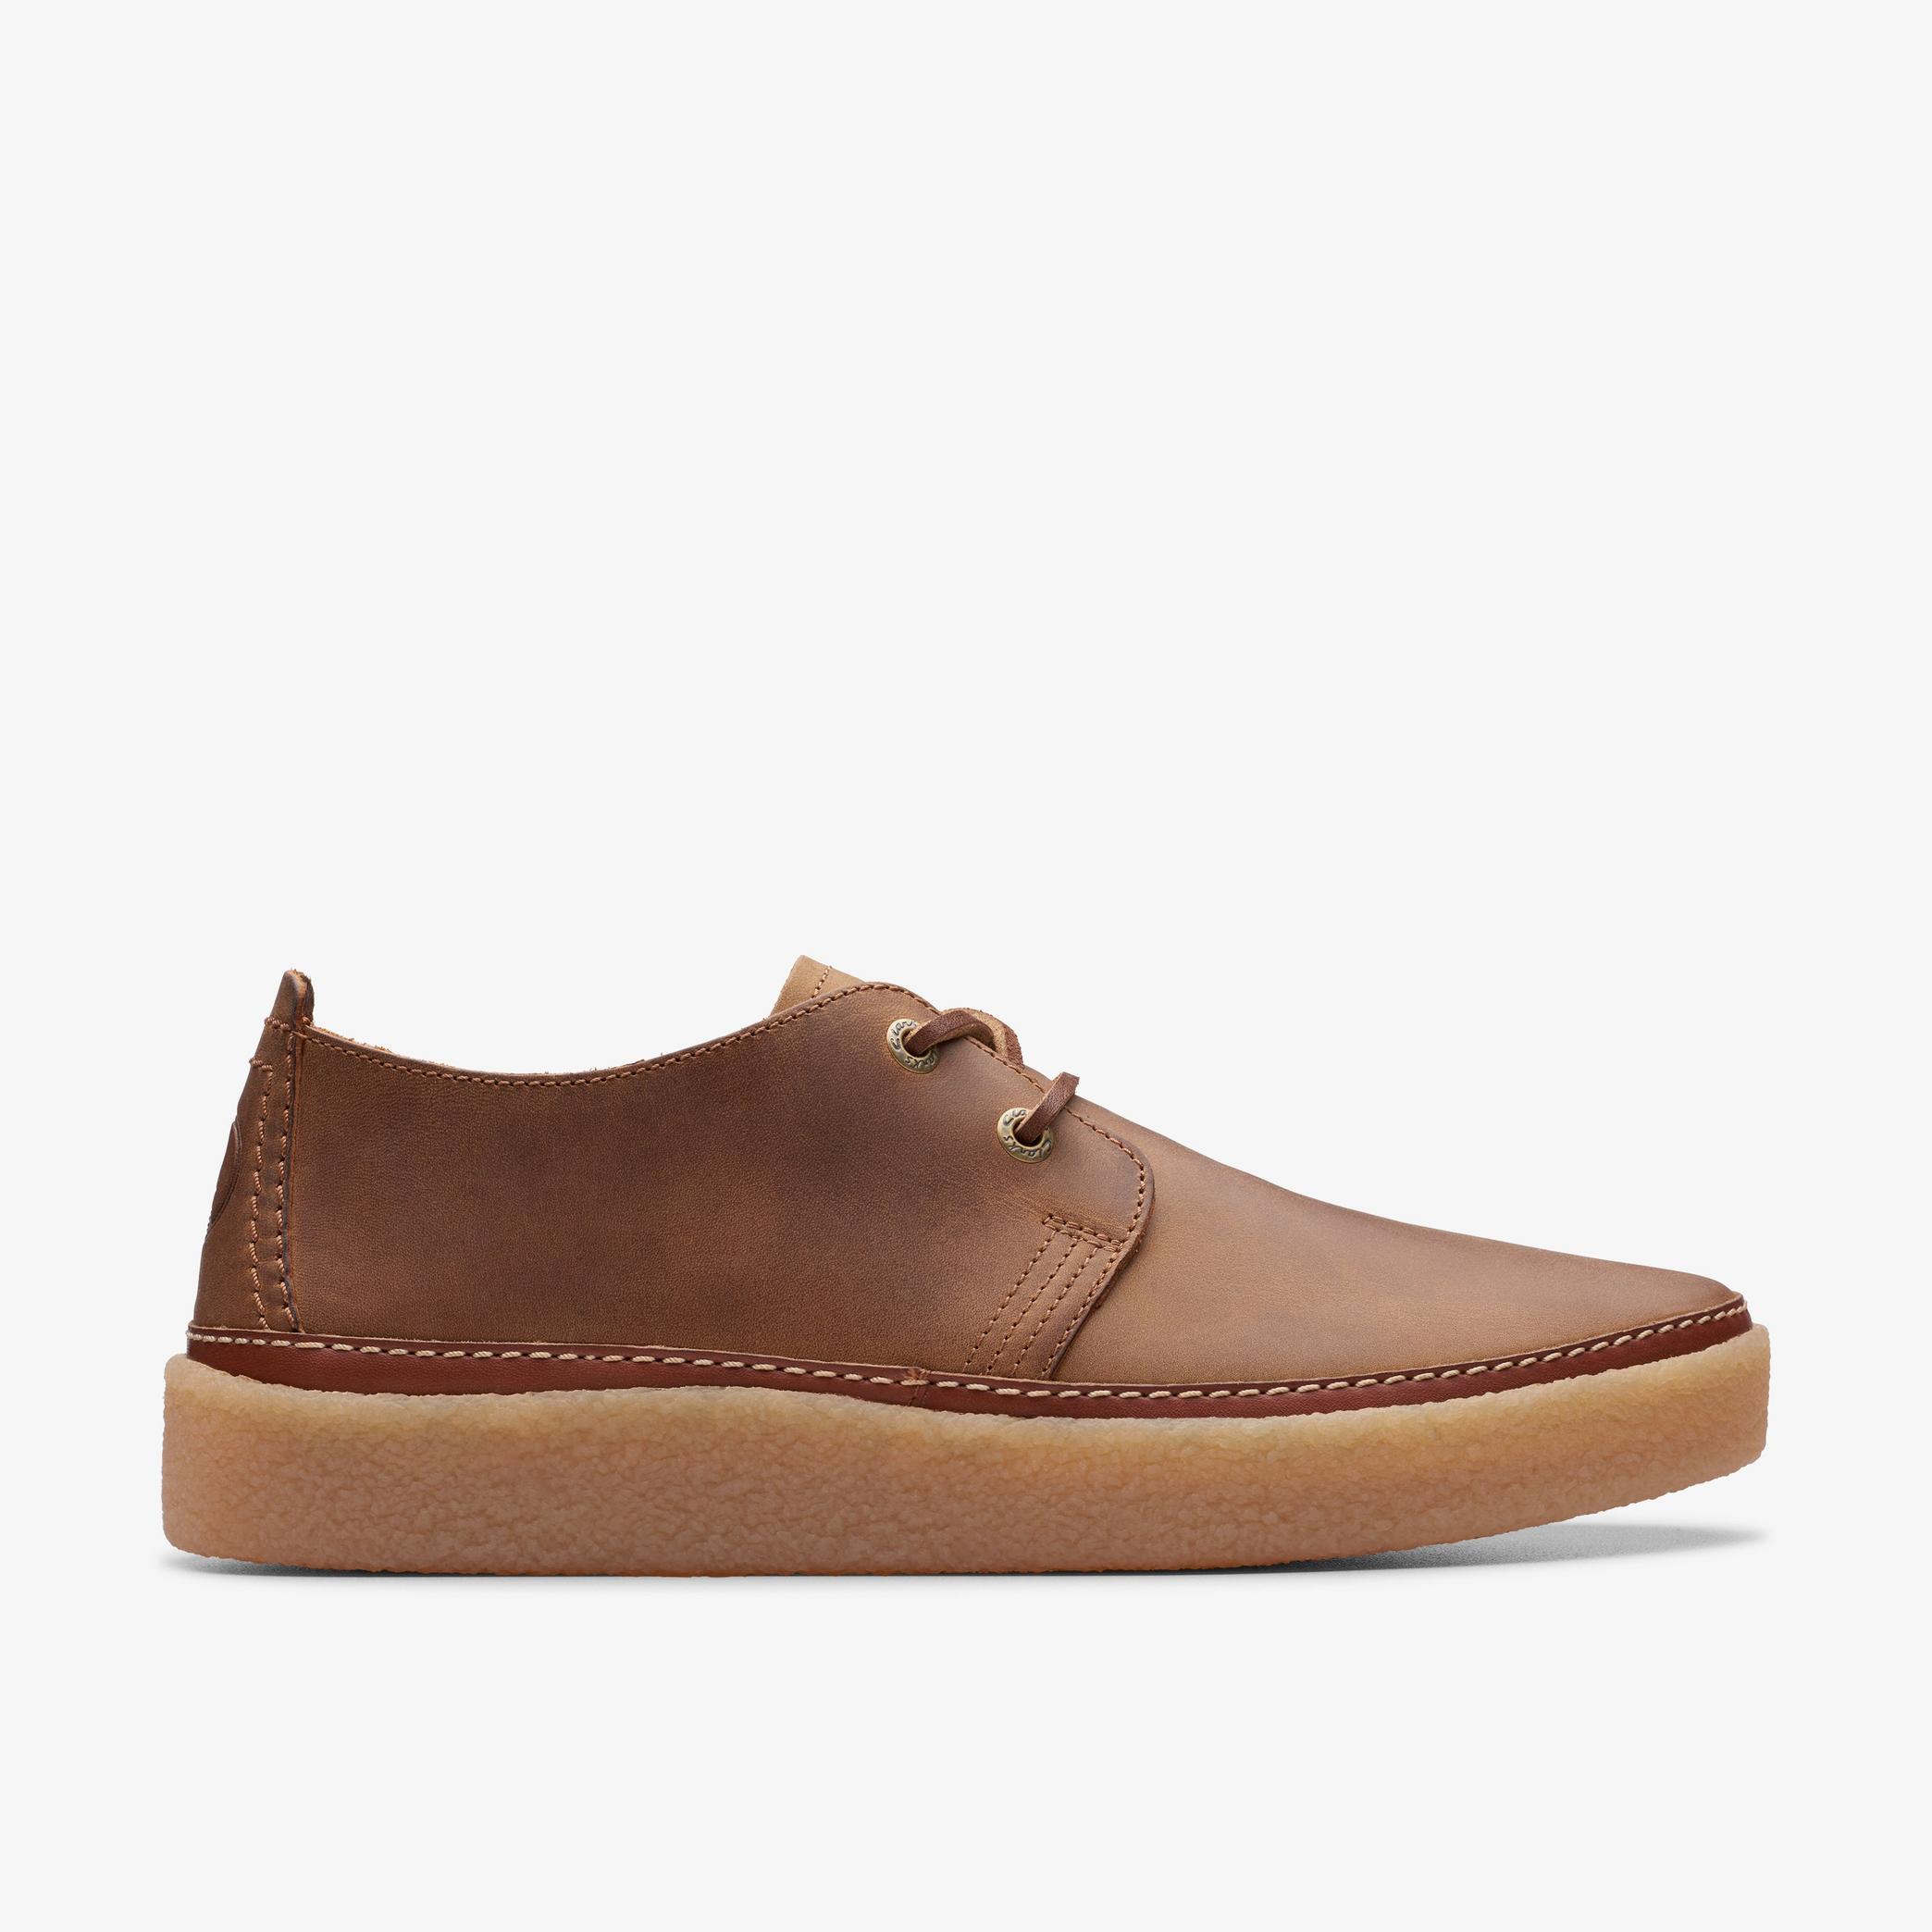 Mens Clarkwood Low Beeswax Leather Shoes | Clarks UK